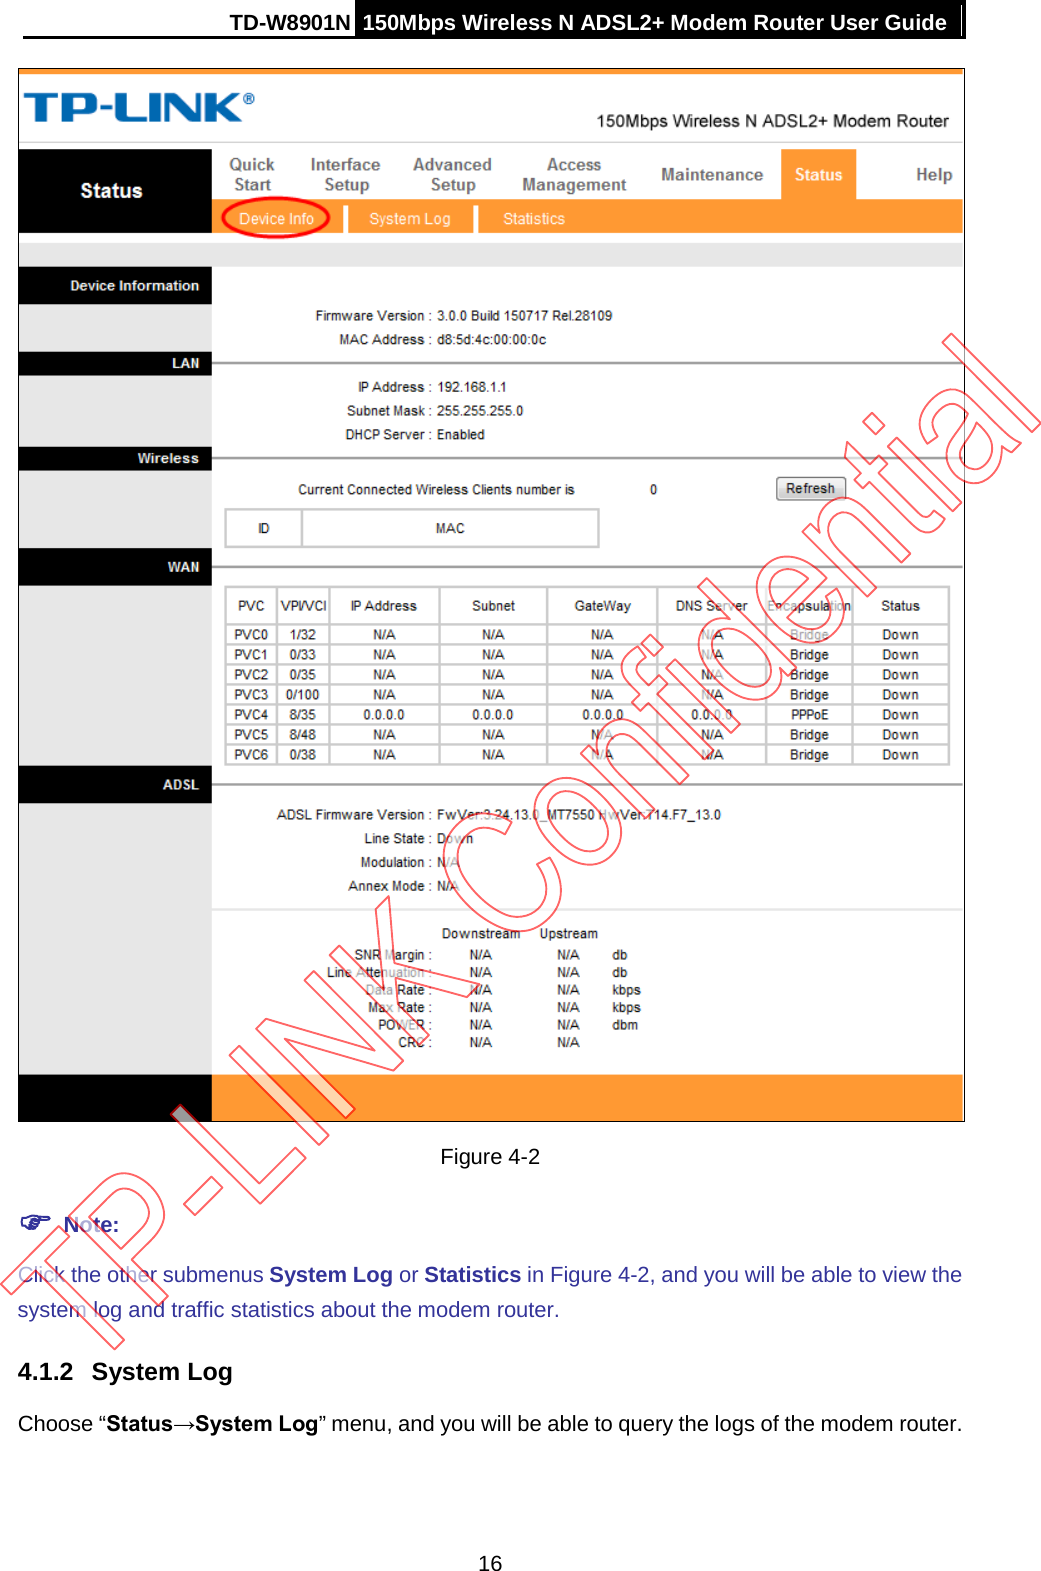 TD-W8901N 150Mbps Wireless N ADSL2+ Modem Router User Guide   Figure 4-2  Note: Click the other submenus System Log or Statistics in Figure 4-2, and you will be able to view the system log and traffic statistics about the modem router. 4.1.2 System Log Choose “Status→System Log” menu, and you will be able to query the logs of the modem router. 16 